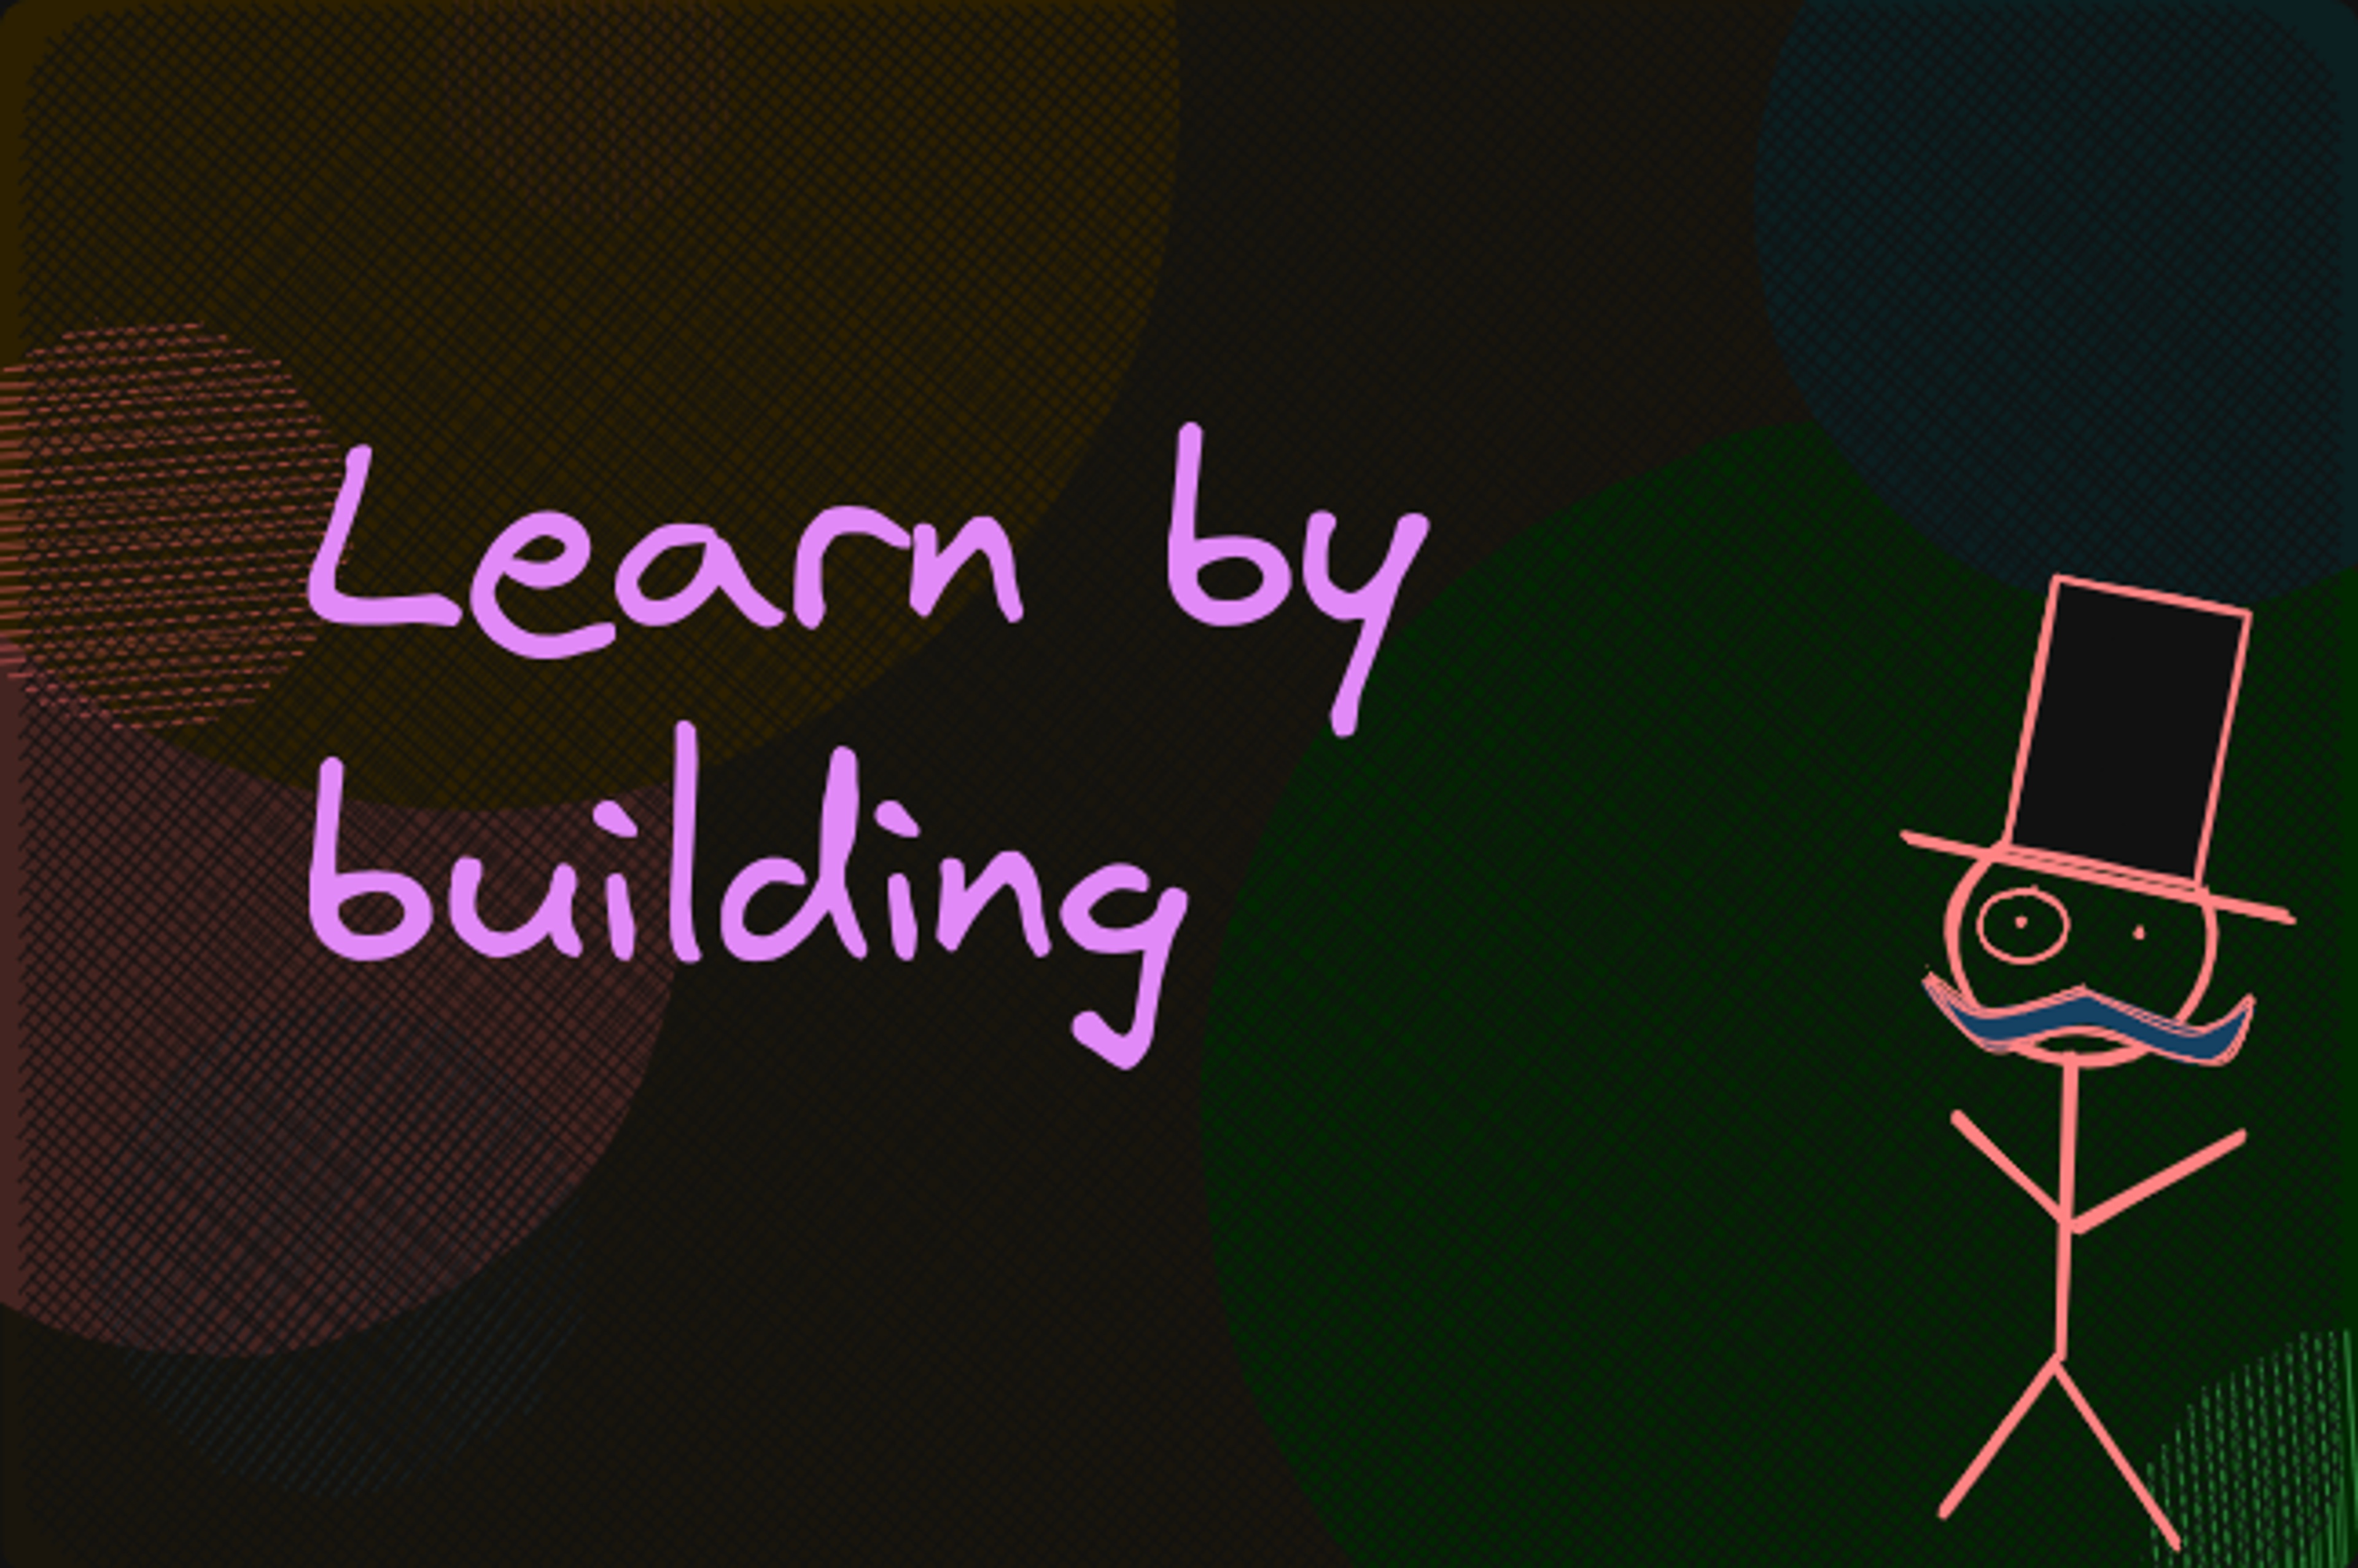 Continuous Learning through building a portfolio